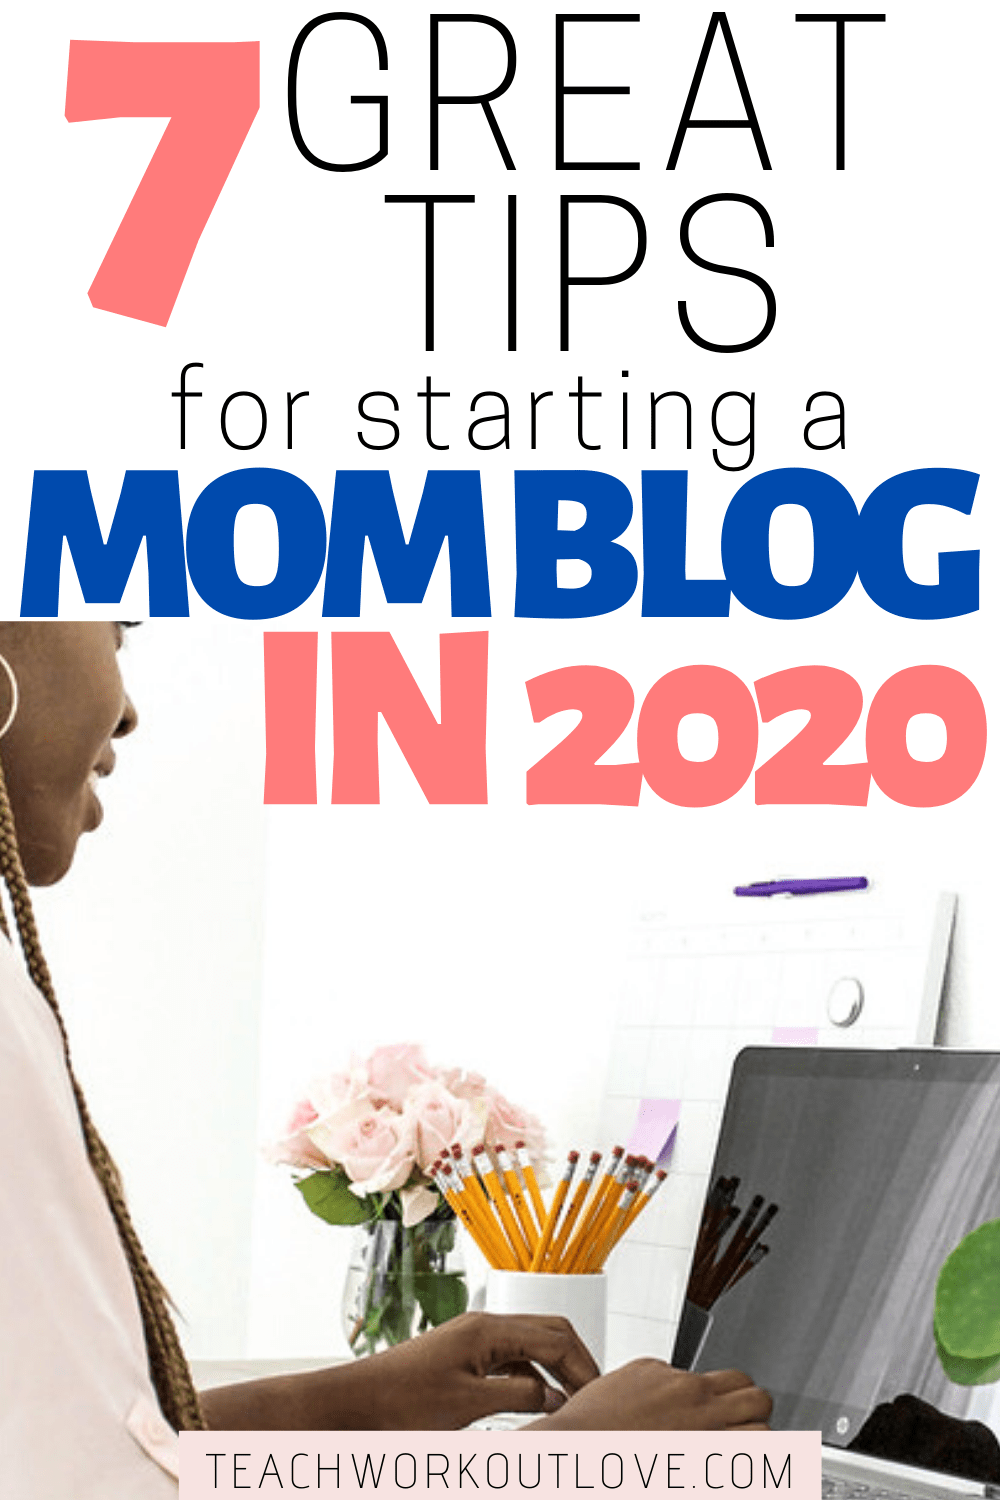 Starting a blog is pretty easy once you get the basics down. Being a new blogger, what are the basics? Here's 7 great tips for starting a mom blog in 2020. 